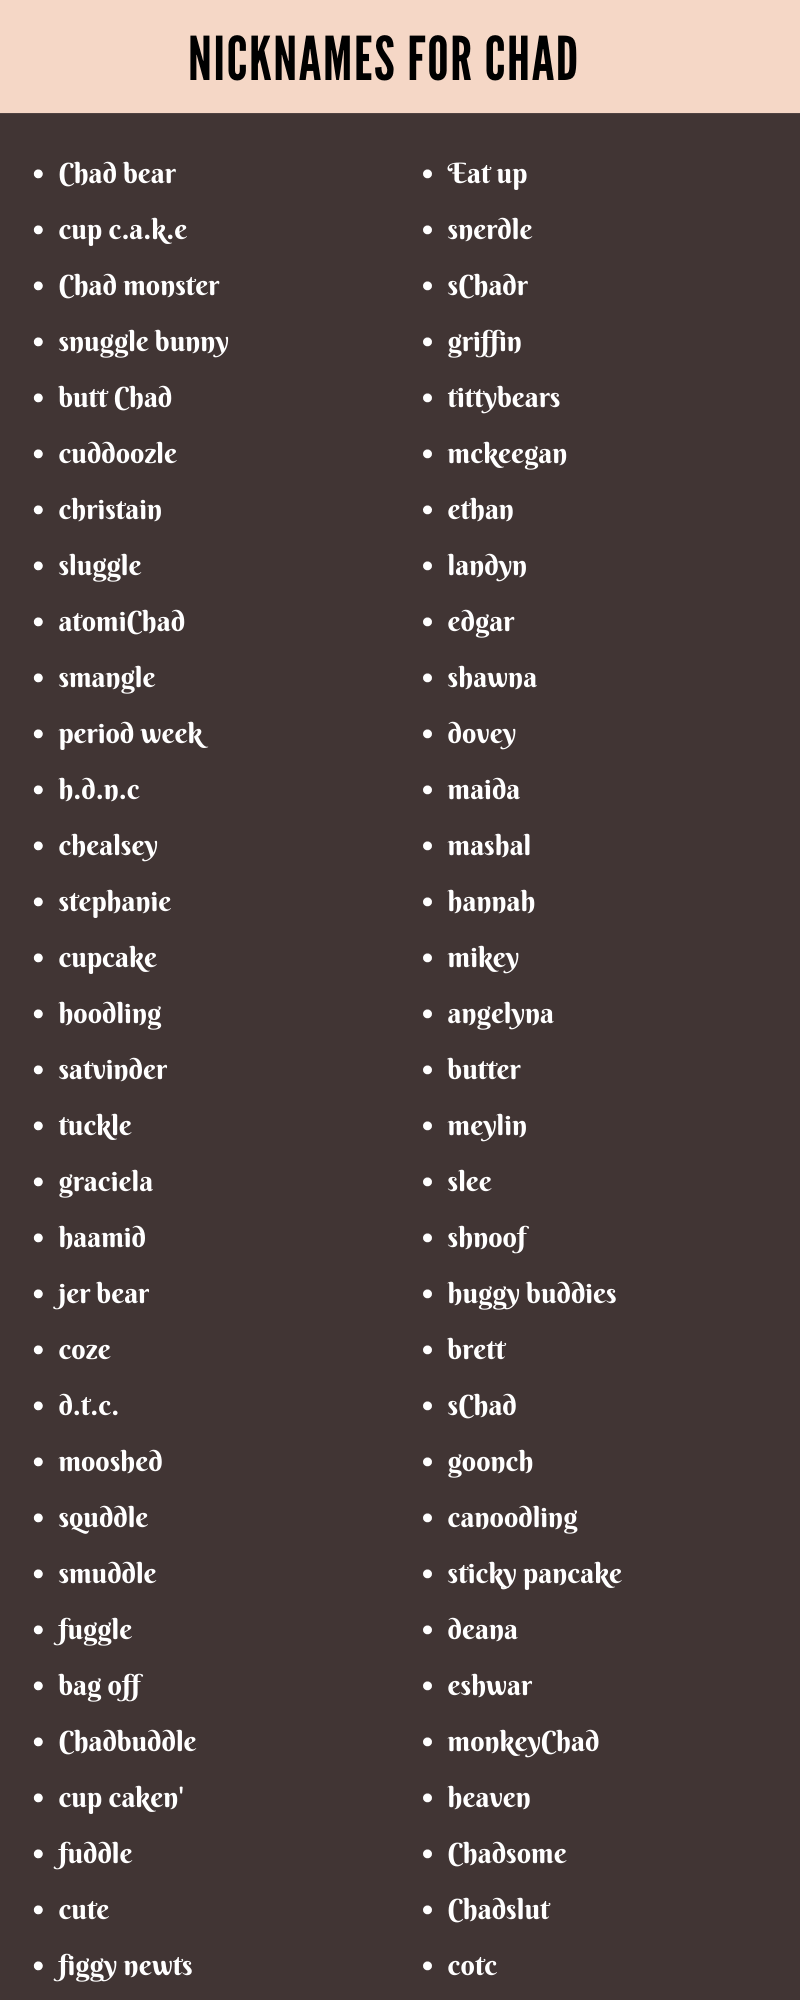 Nicknames For Chad